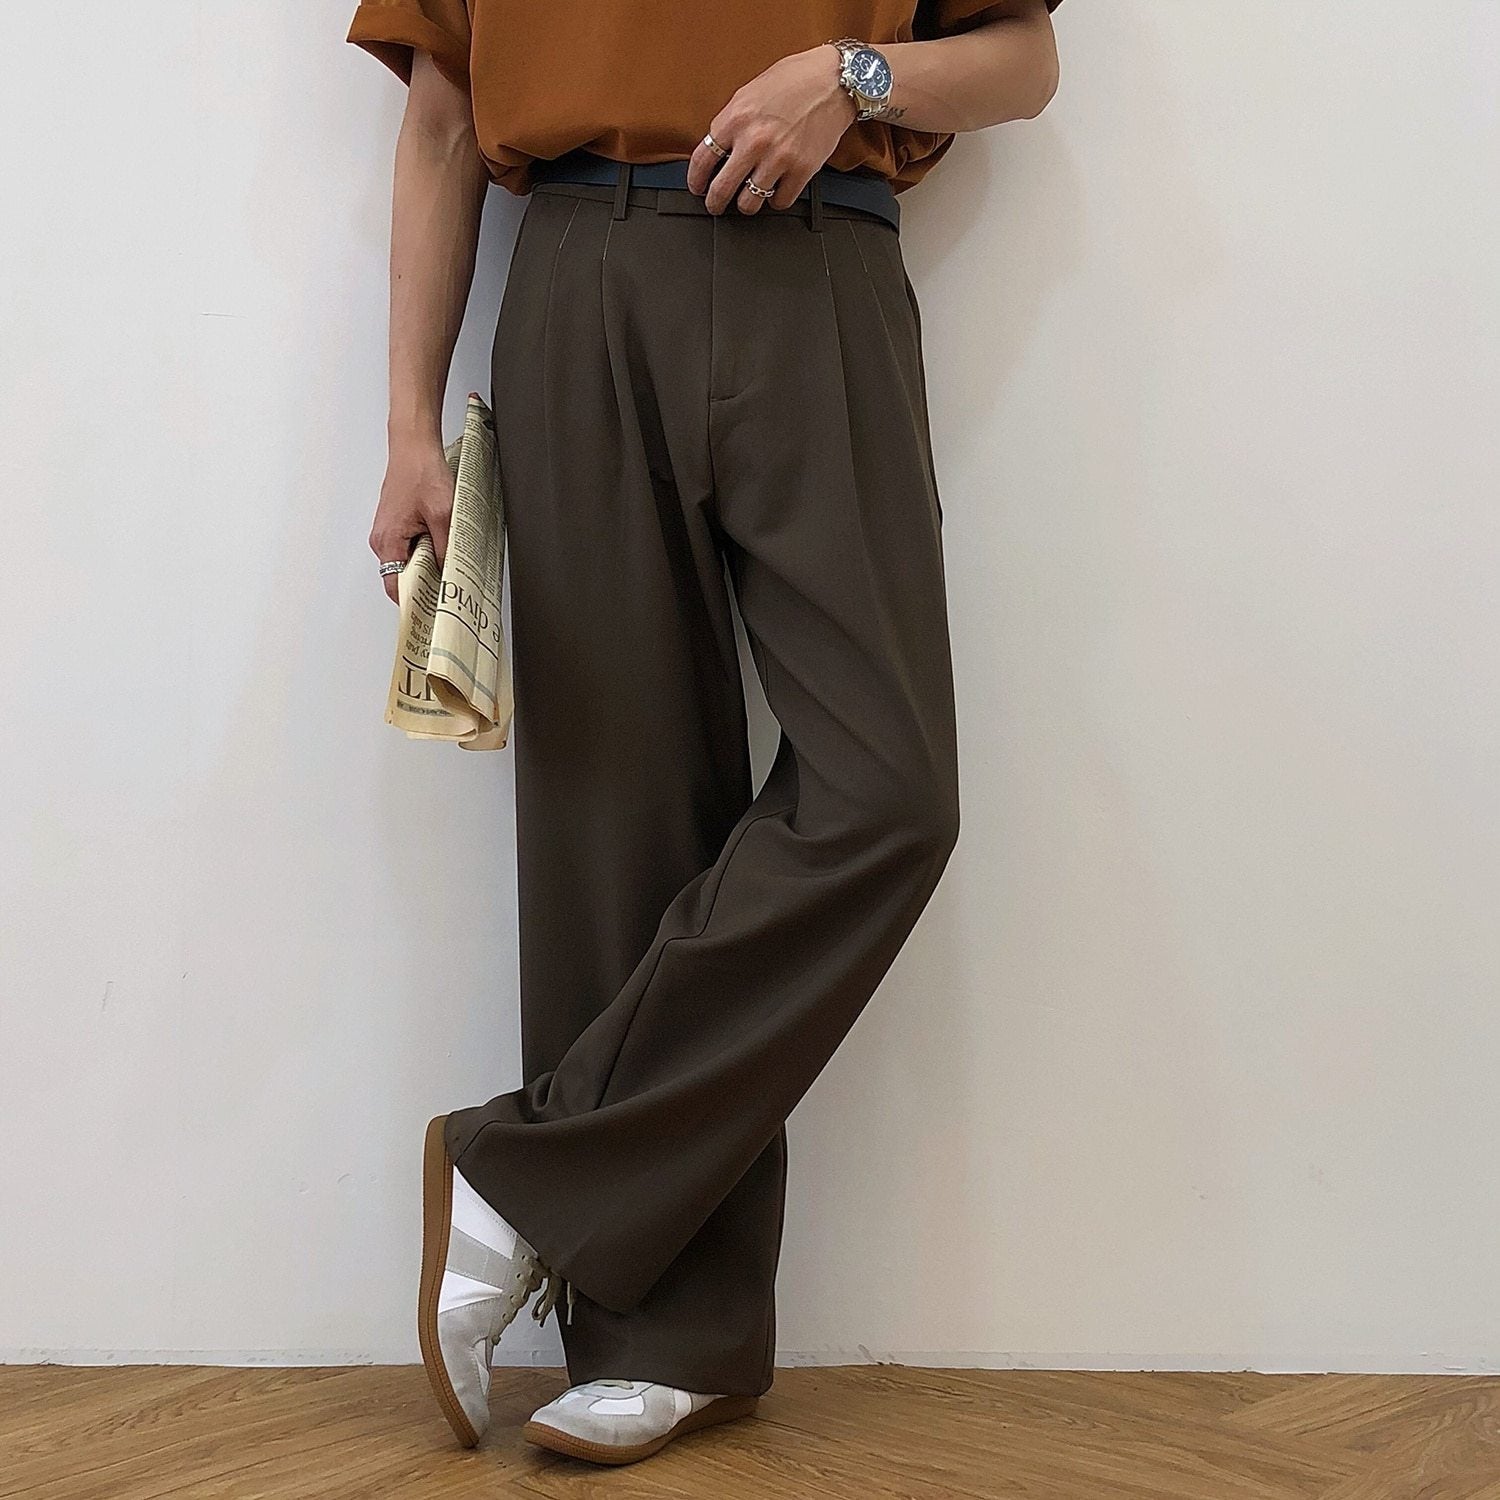 PLEATED WIDE-LEG TROUSERS